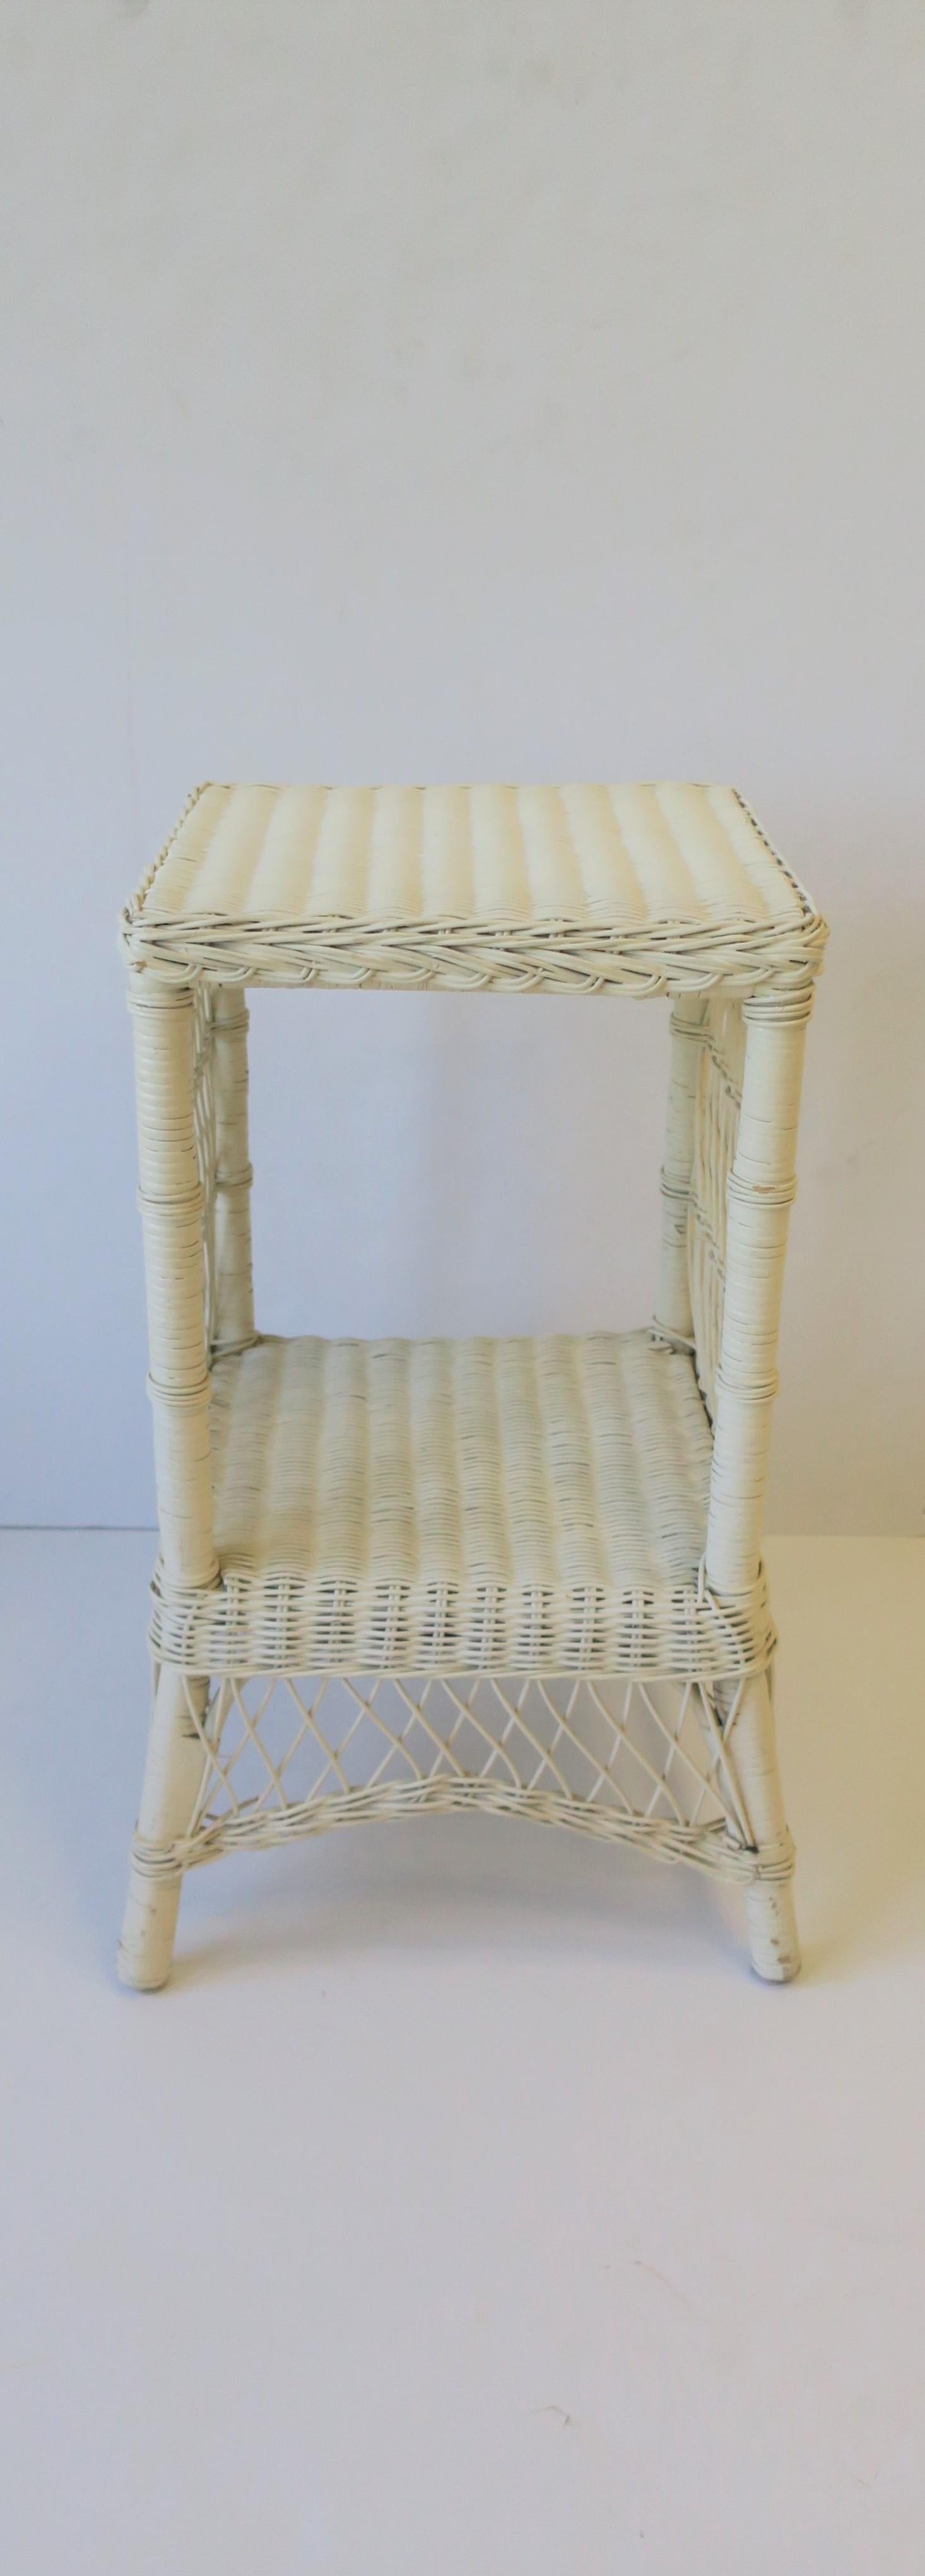 A square white wicker end table or night stand [nightstand] table with lower shelf, circa 1990s. 

Table is a convenient size measuring: 
12.5